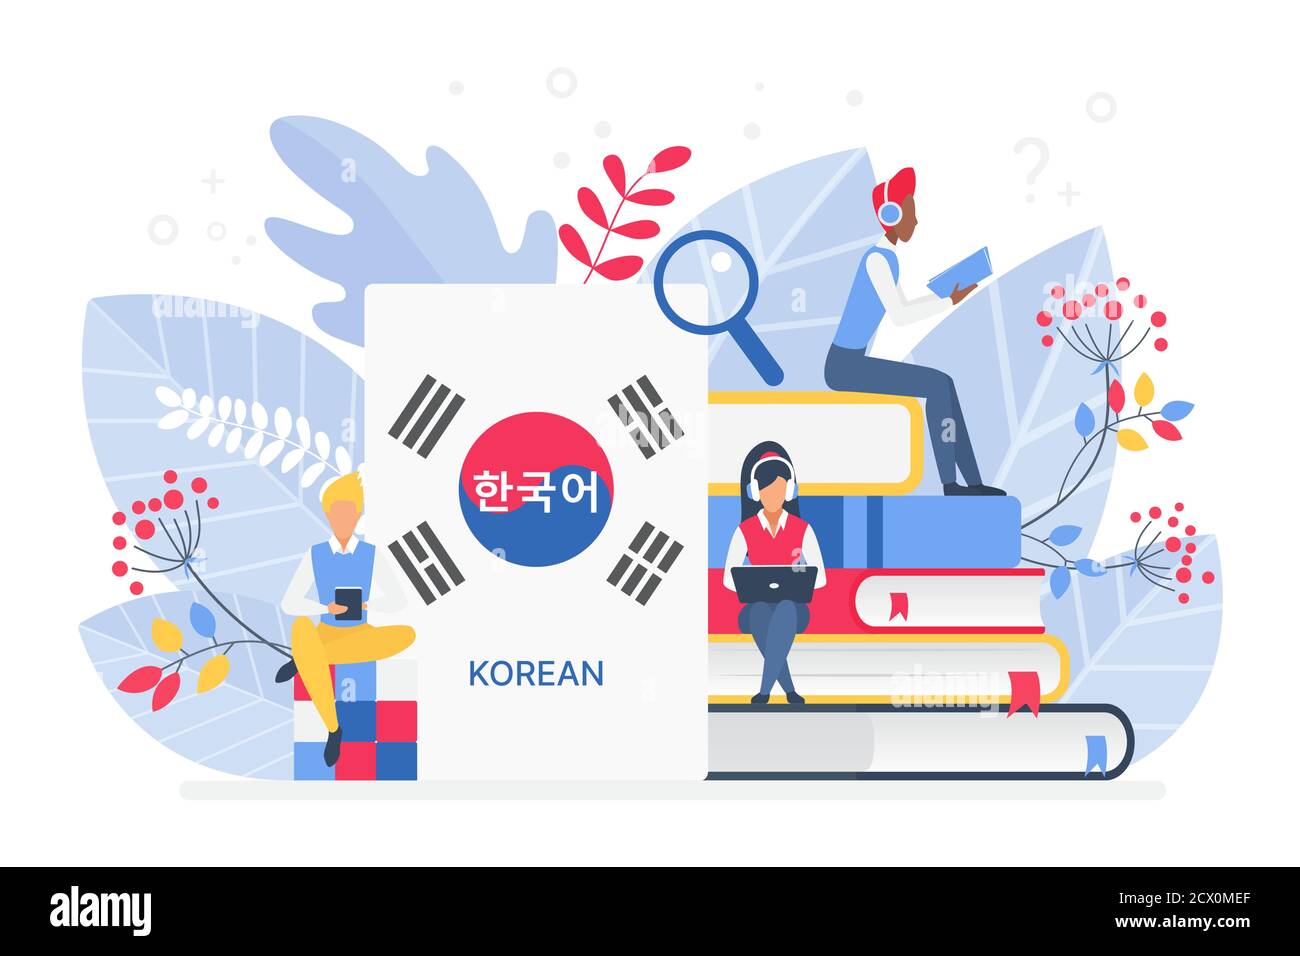 People learning Korean language vector illustration. Korea Distance education, online learning courses concept. Students reading books cartoon characters. Teaching foreign languages Stock Vector